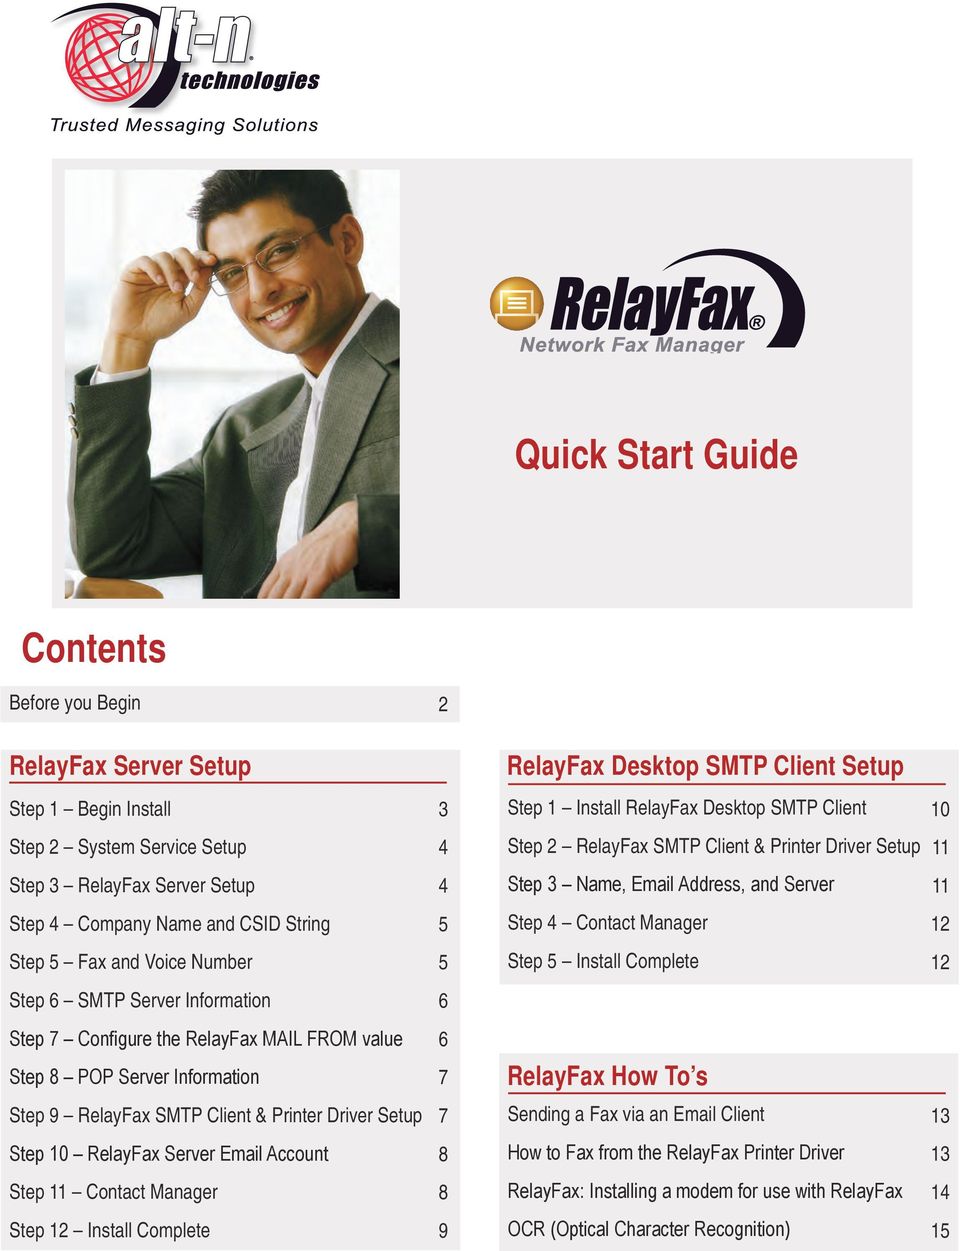 Voice Number 5 Step 5 Install Complete 12 Step 6 SMTP Server Information 6 Step 7 Configure the RelayFax MAIL FROM value Step 8 POP Server Information 6 7 RelayFax How To s Step 9 RelayFax SMTP